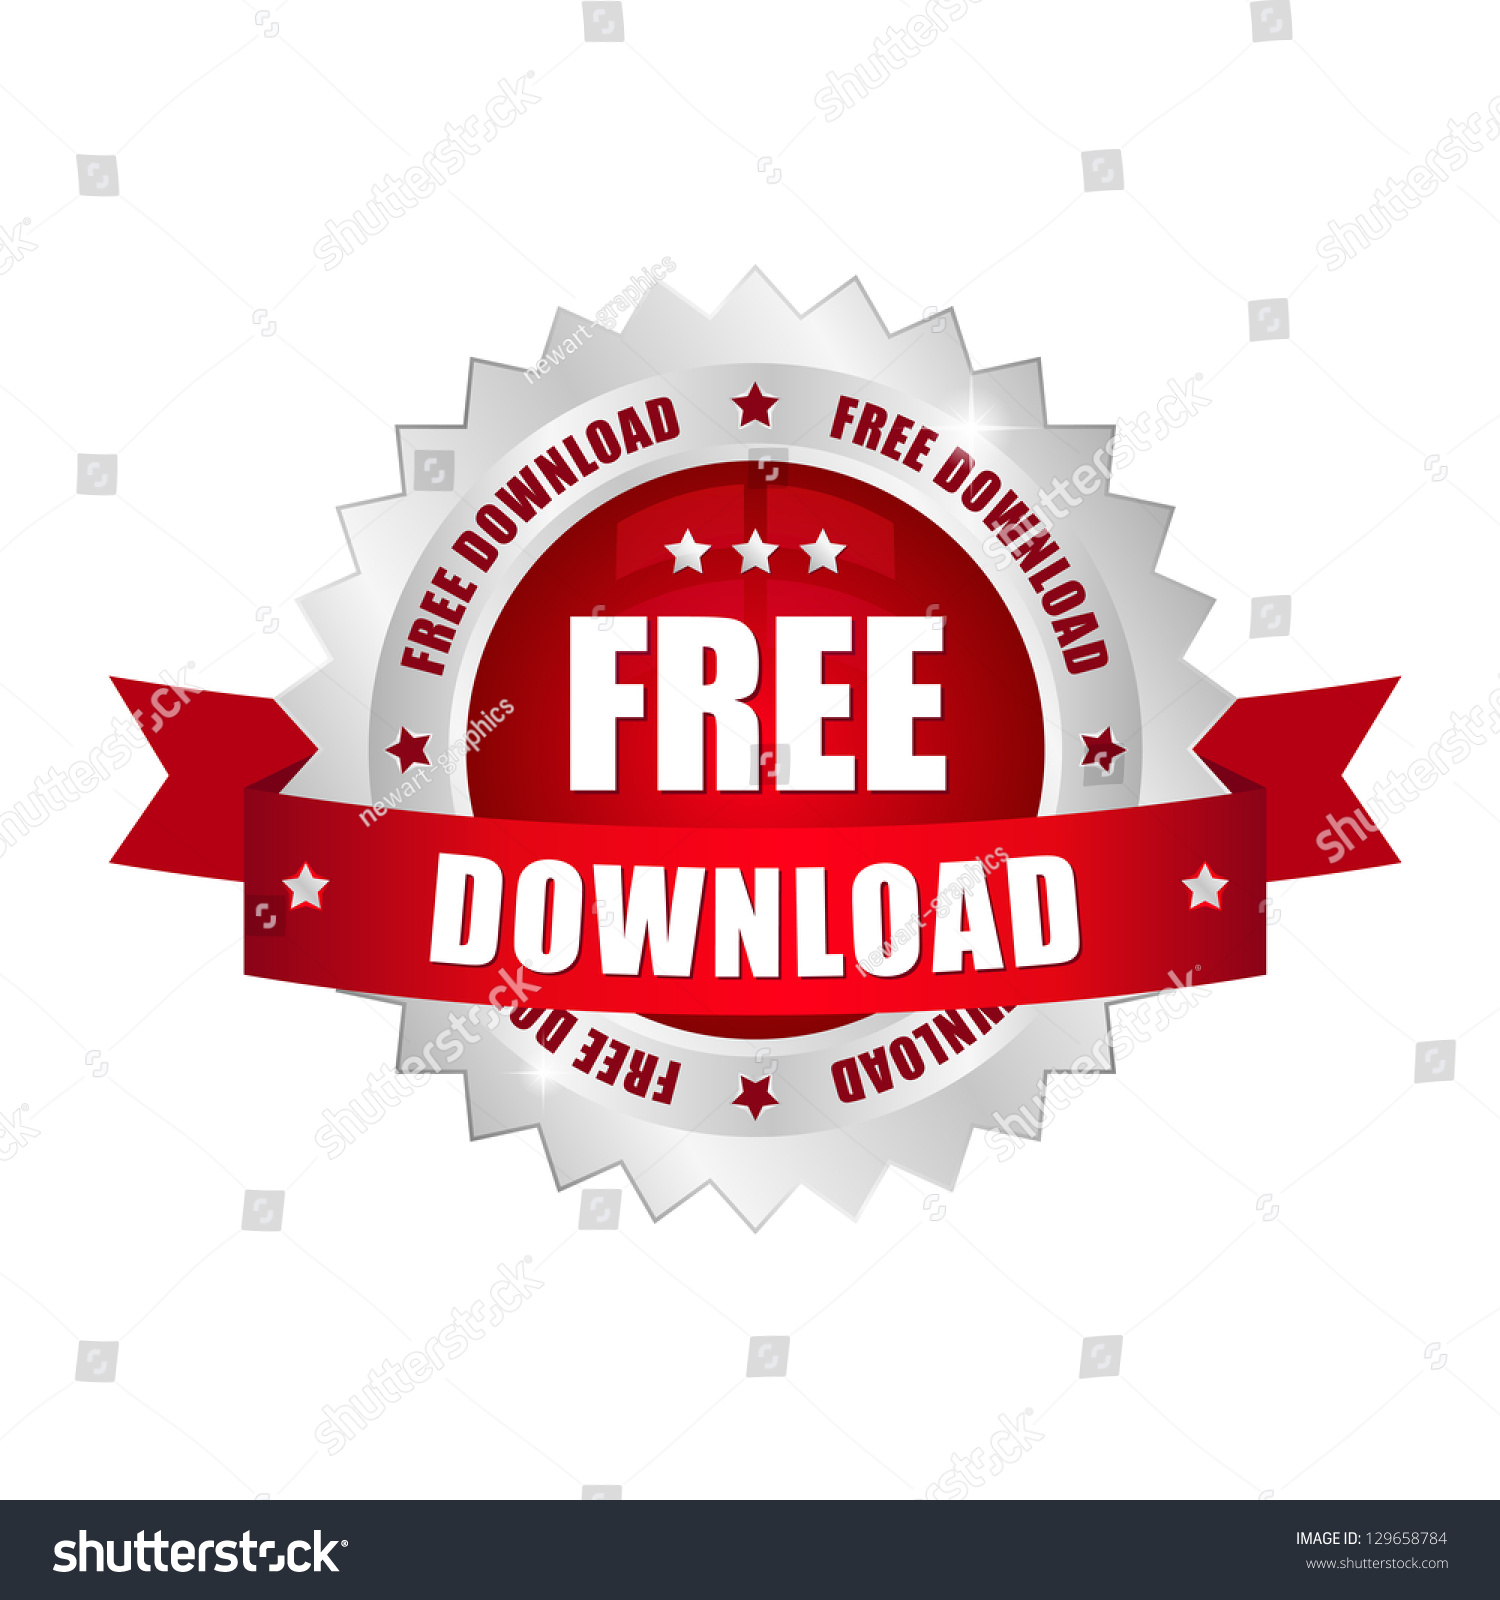 vector free download button - photo #37